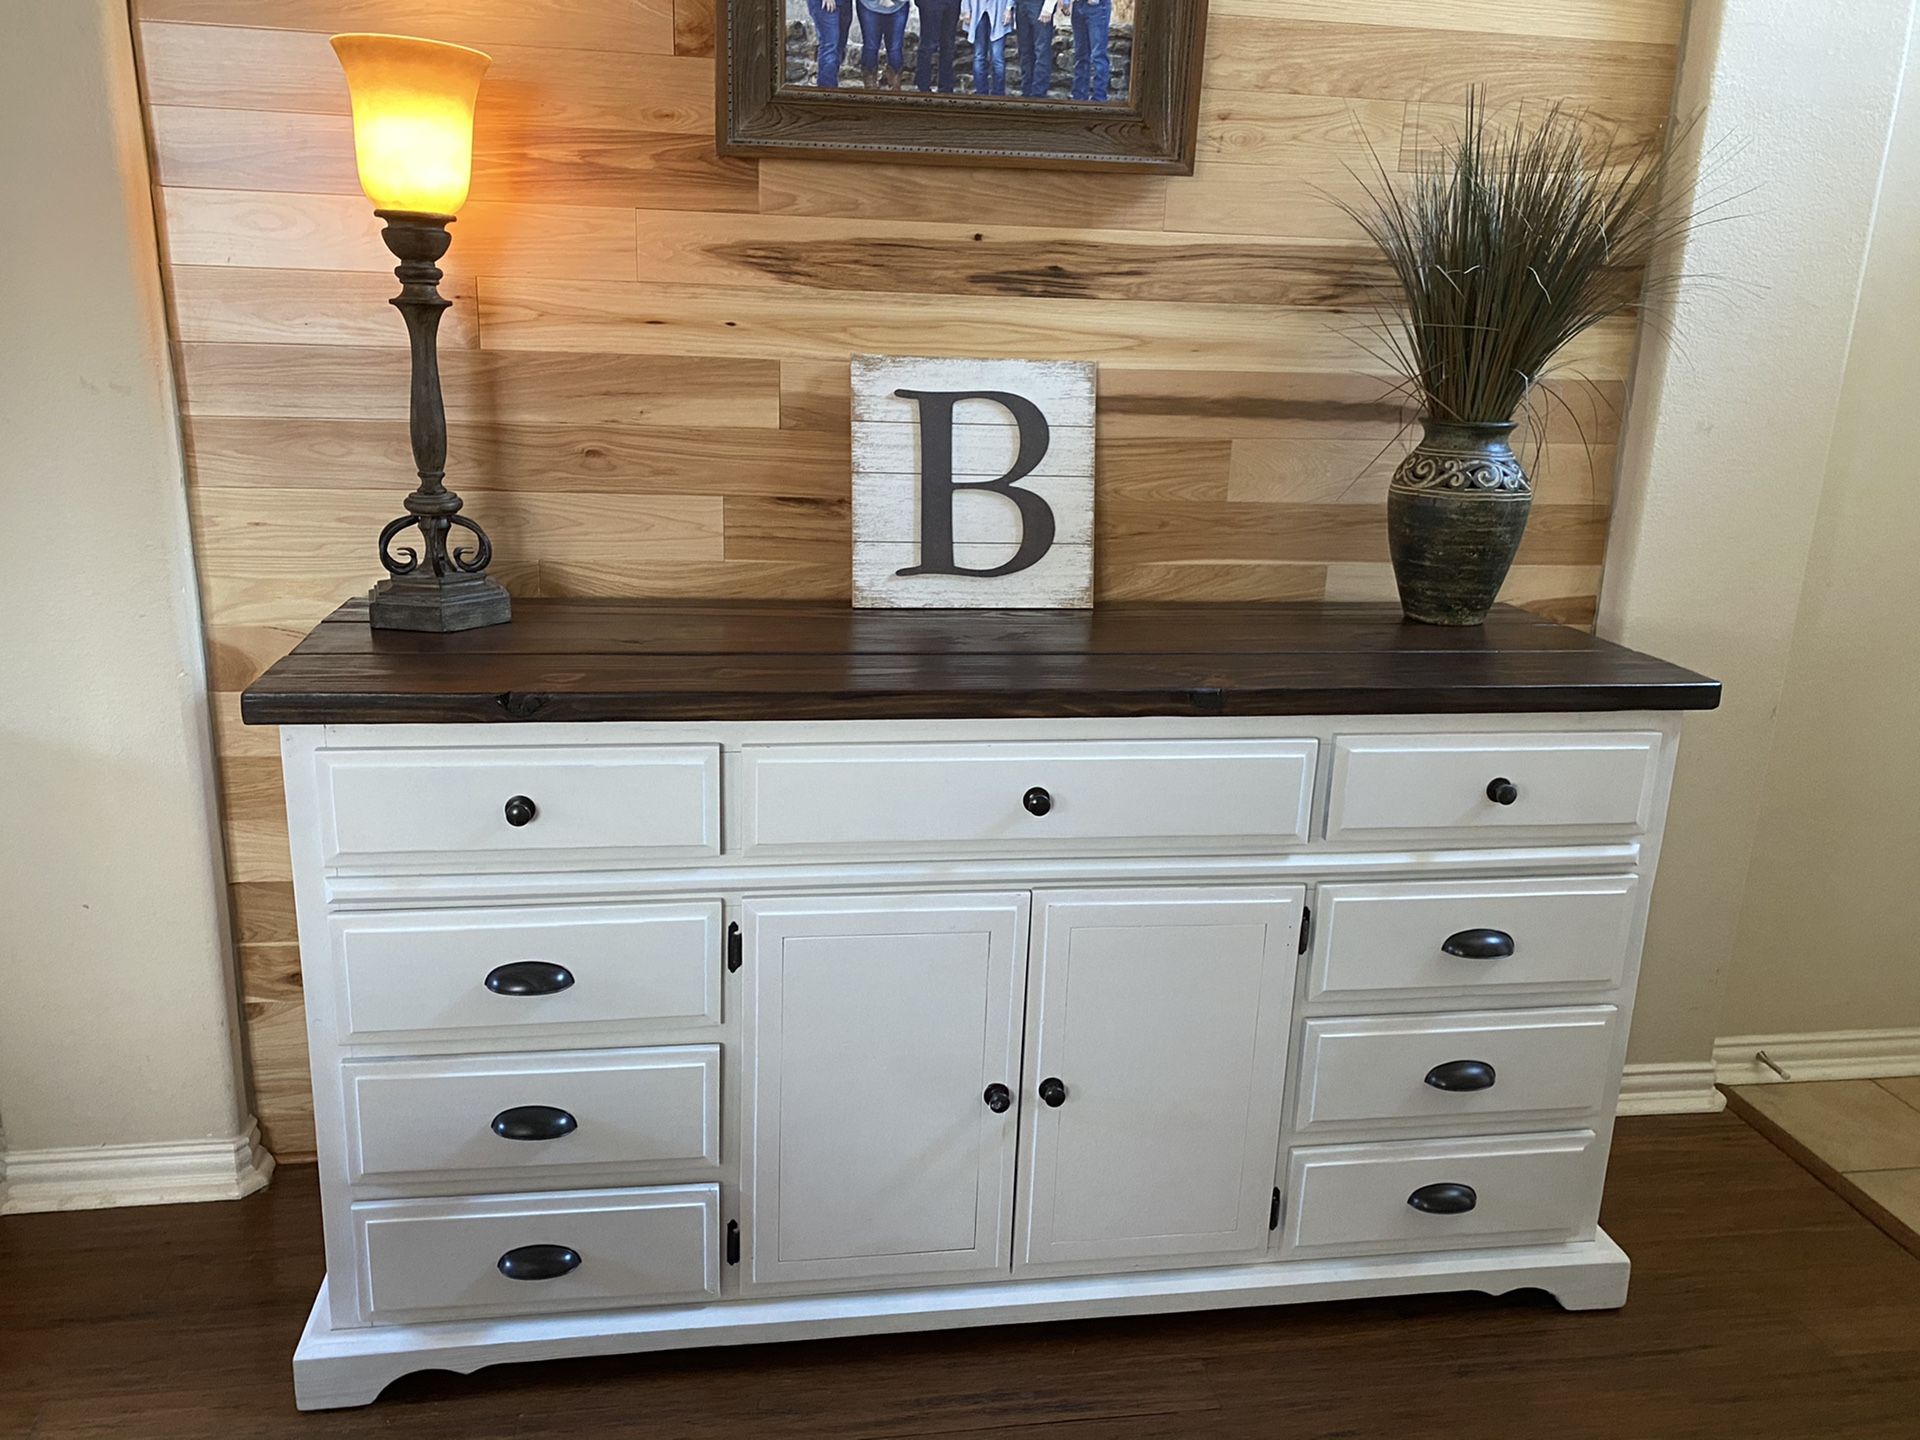 Extra large solid farmhouse style wood dresser, entry table, or TV console. $425